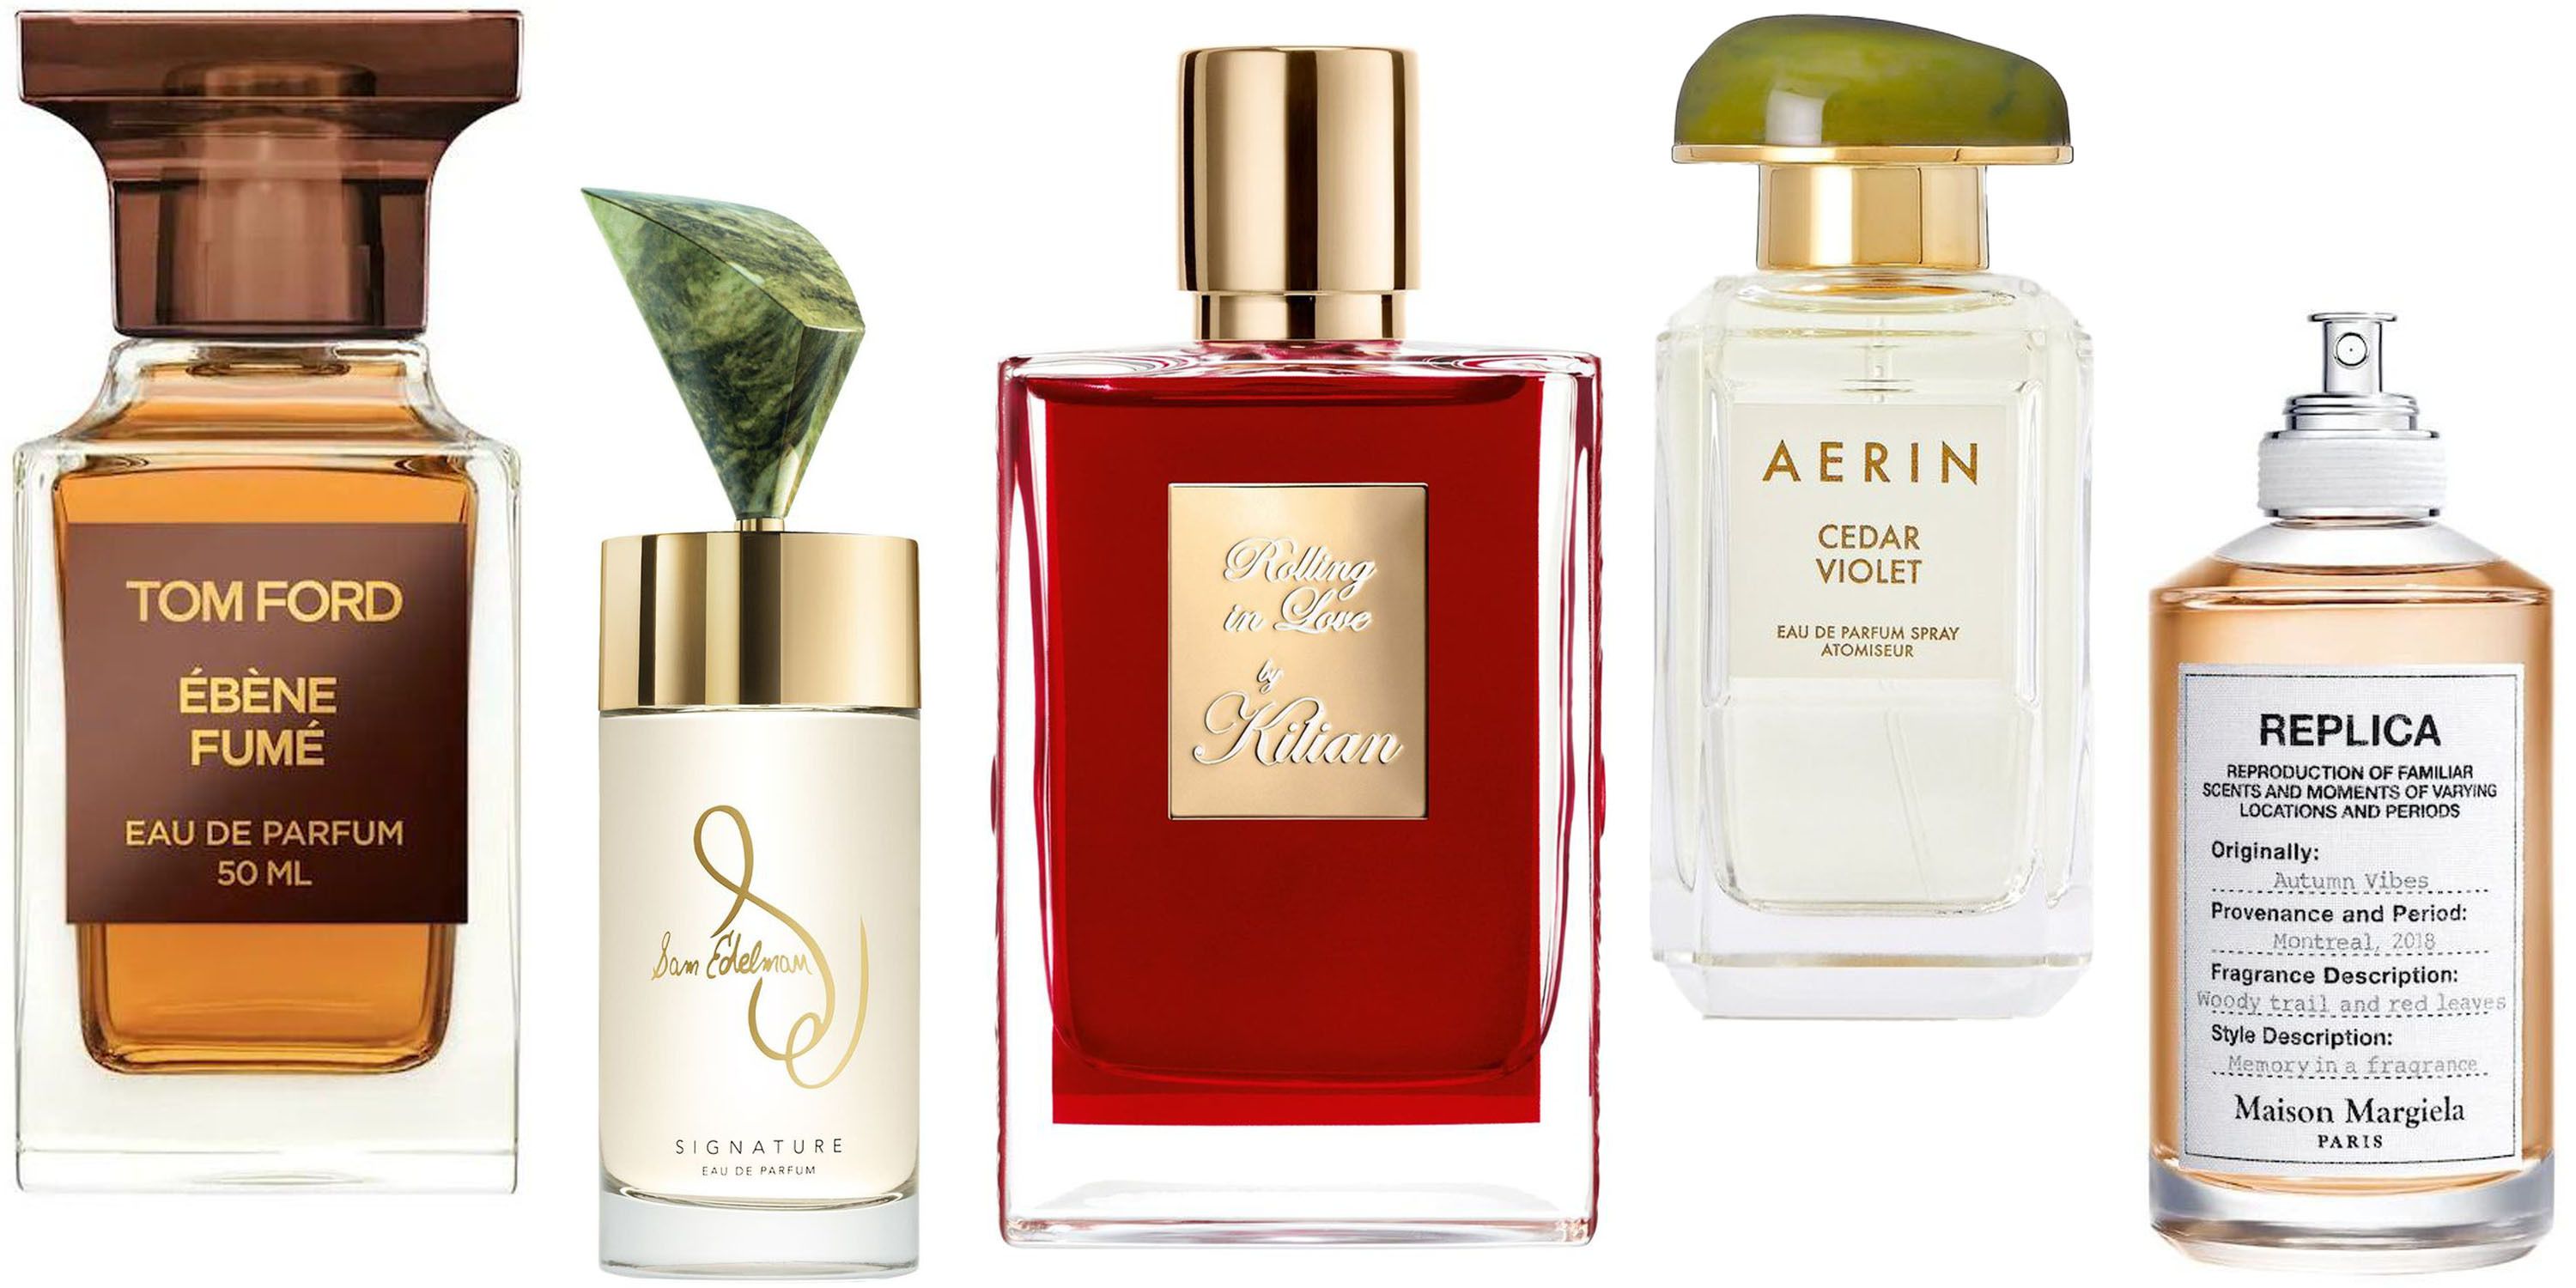 New Winter Perfumes 2021 - Best Fragrances and Scents For Winter 2021